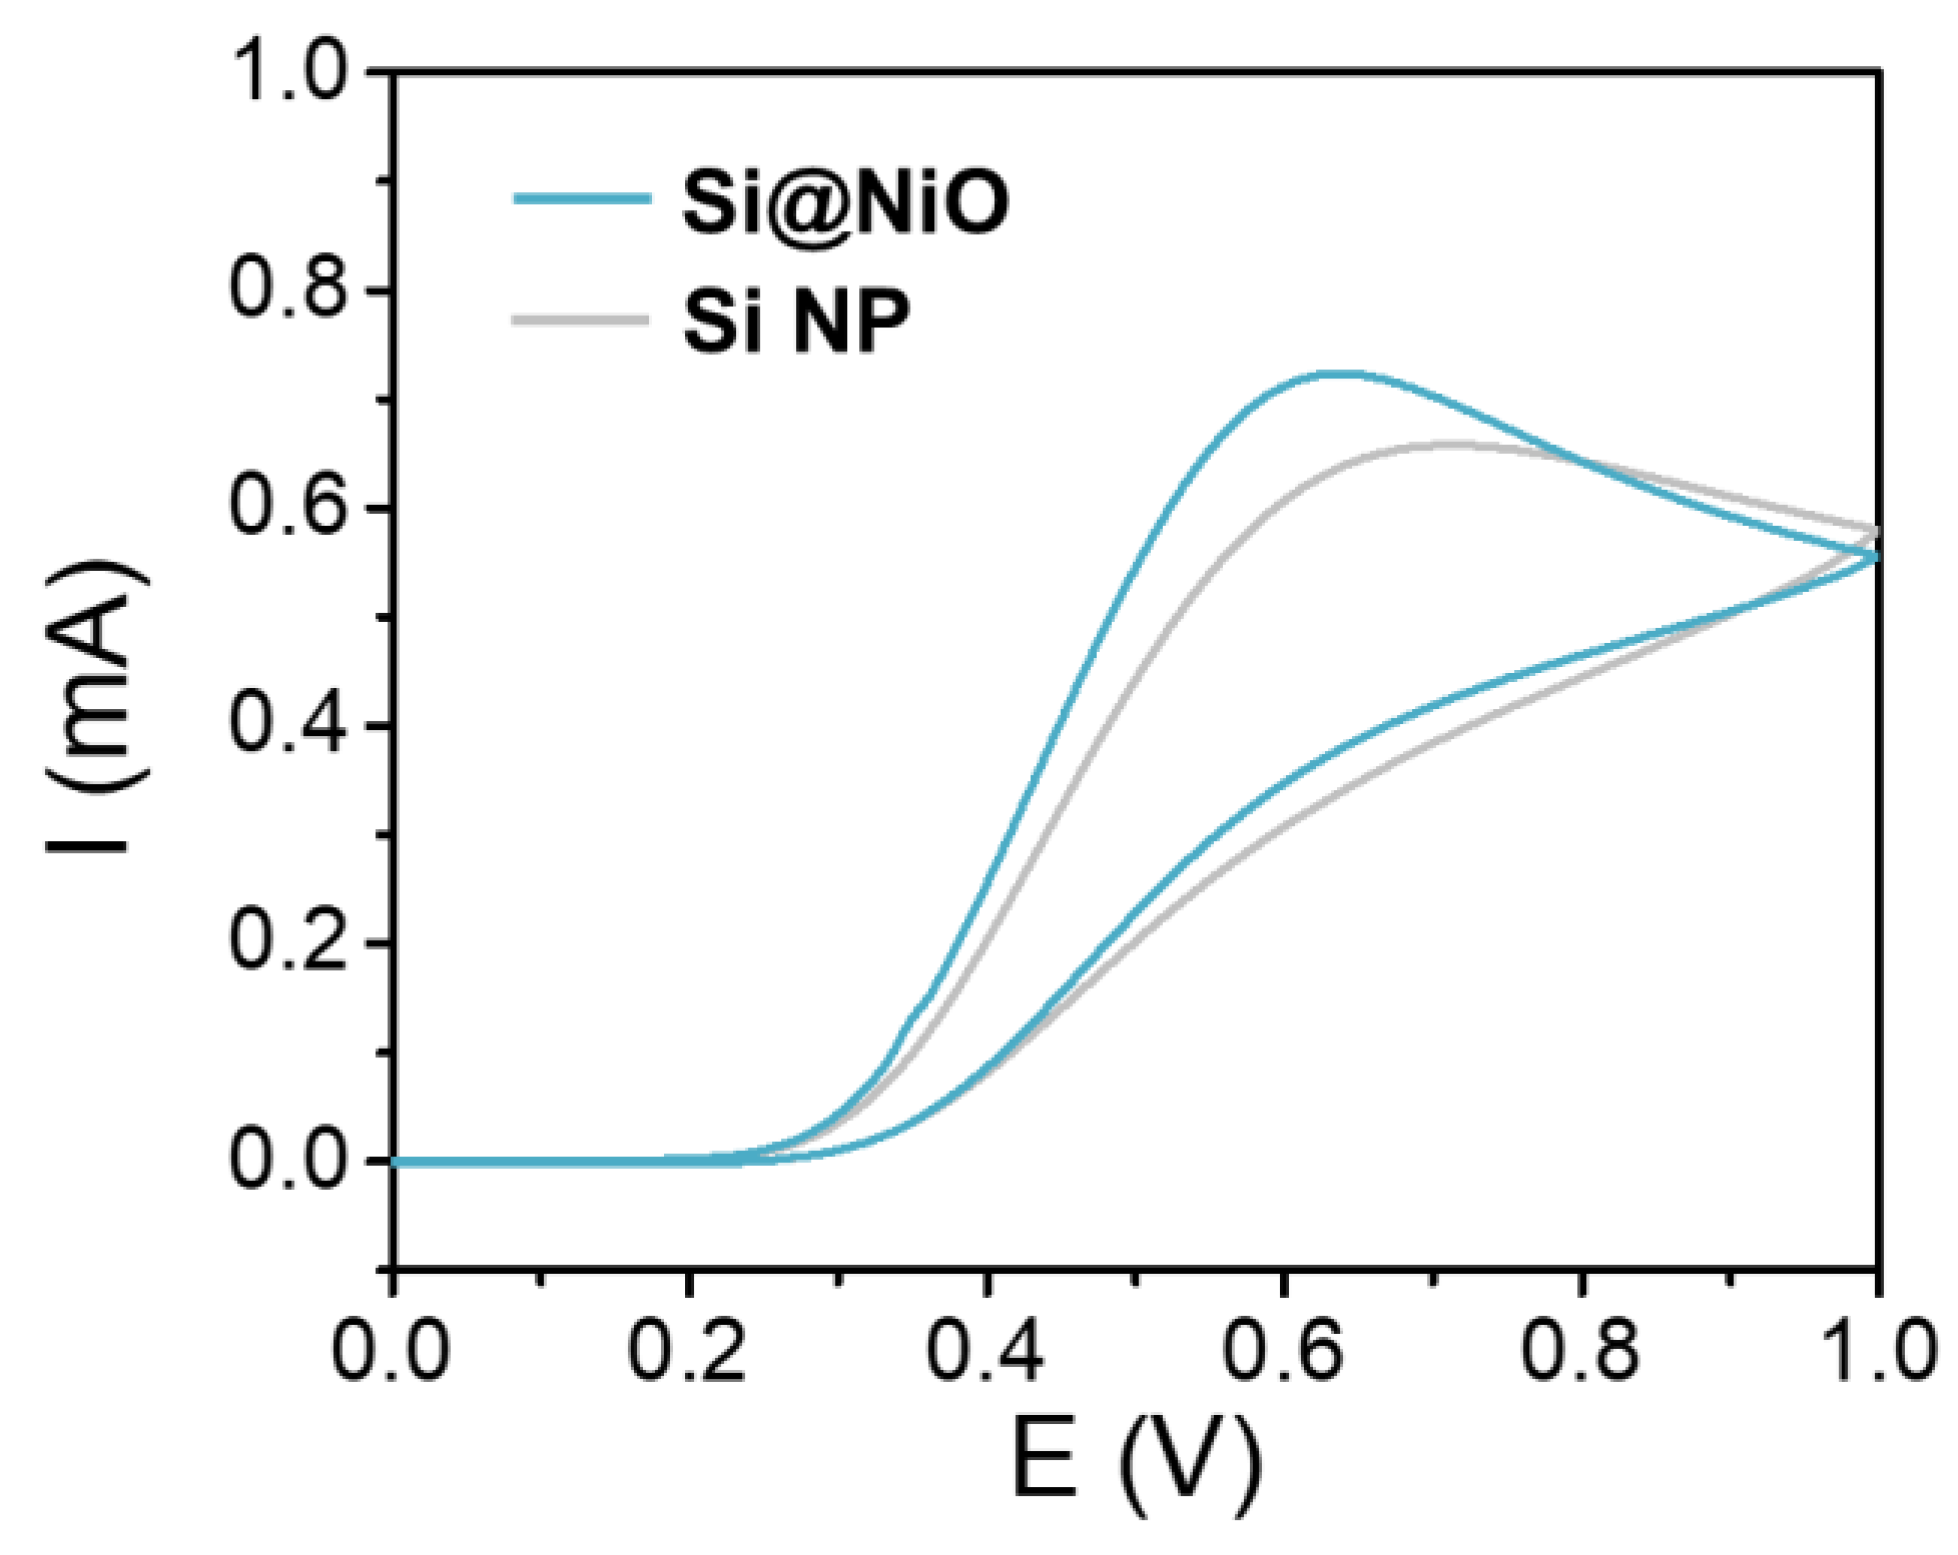 Electrochemical characterization. CV curves of Si NP and Si@NiO acquired in PBS containing 0.1 M AA; scan rate: 100 mVs-1.